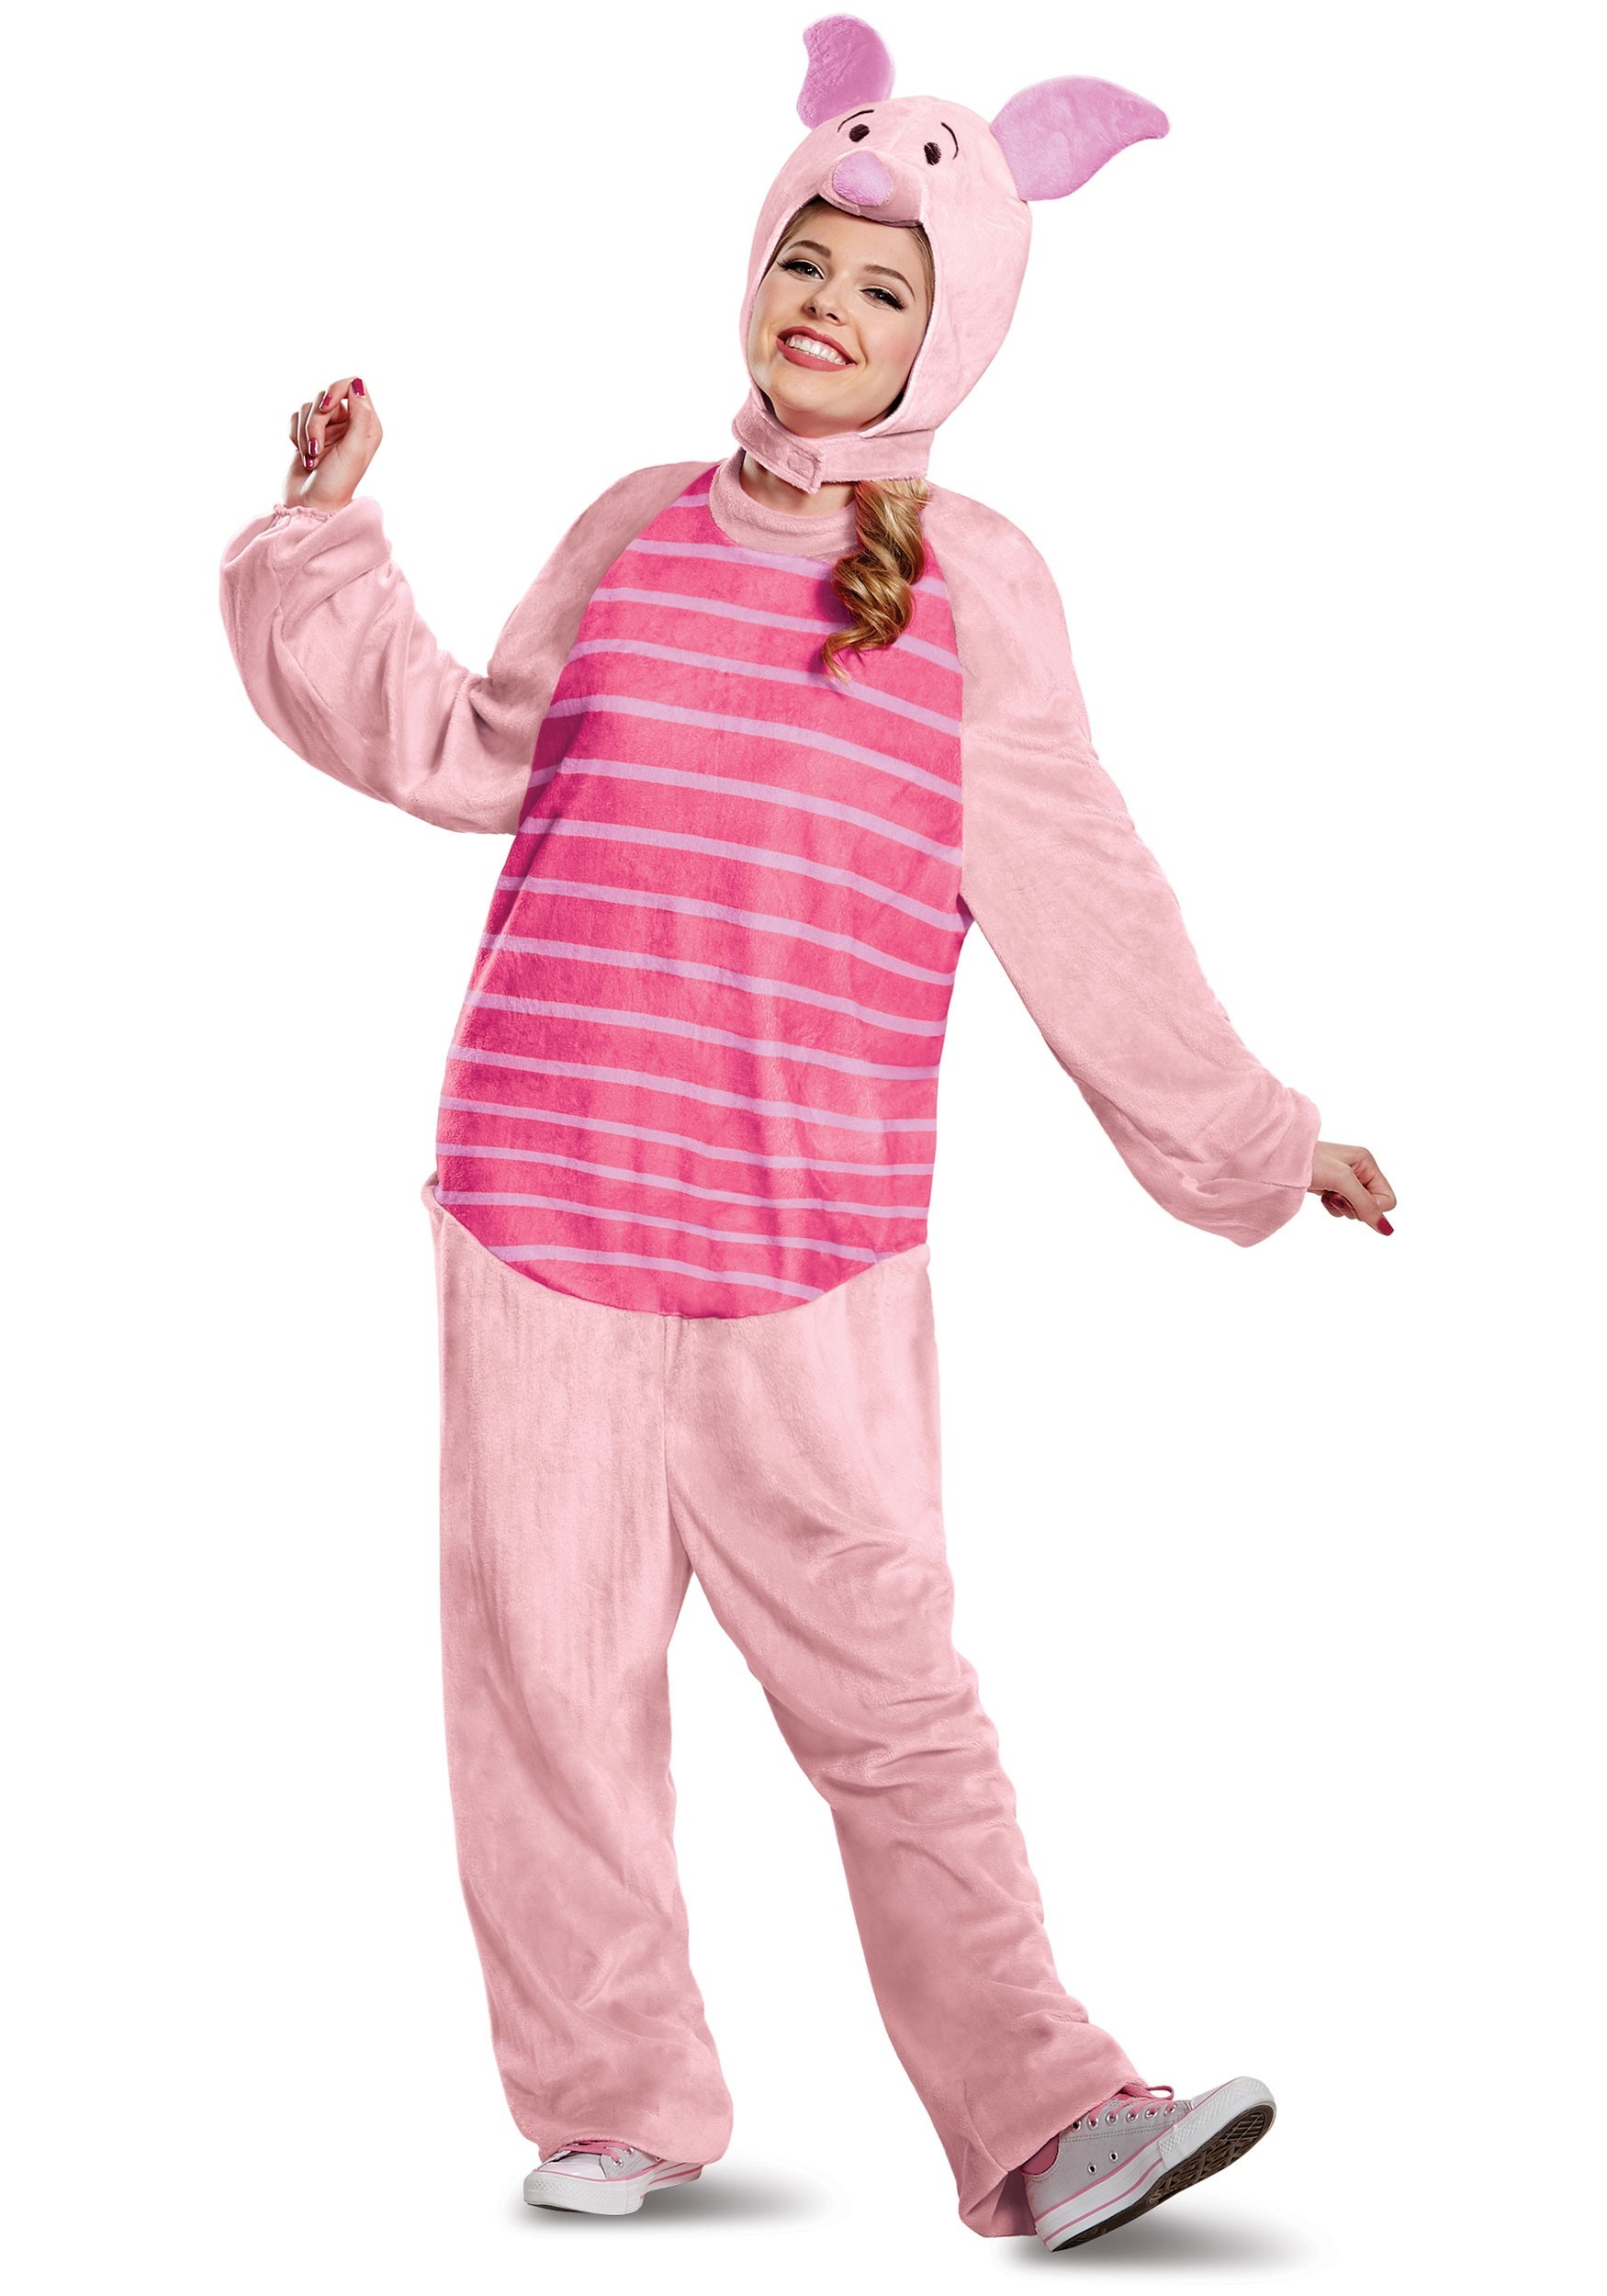 Image of Winnie the Pooh Piglet Deluxe Costume for Adults ID DI65578-L/XL